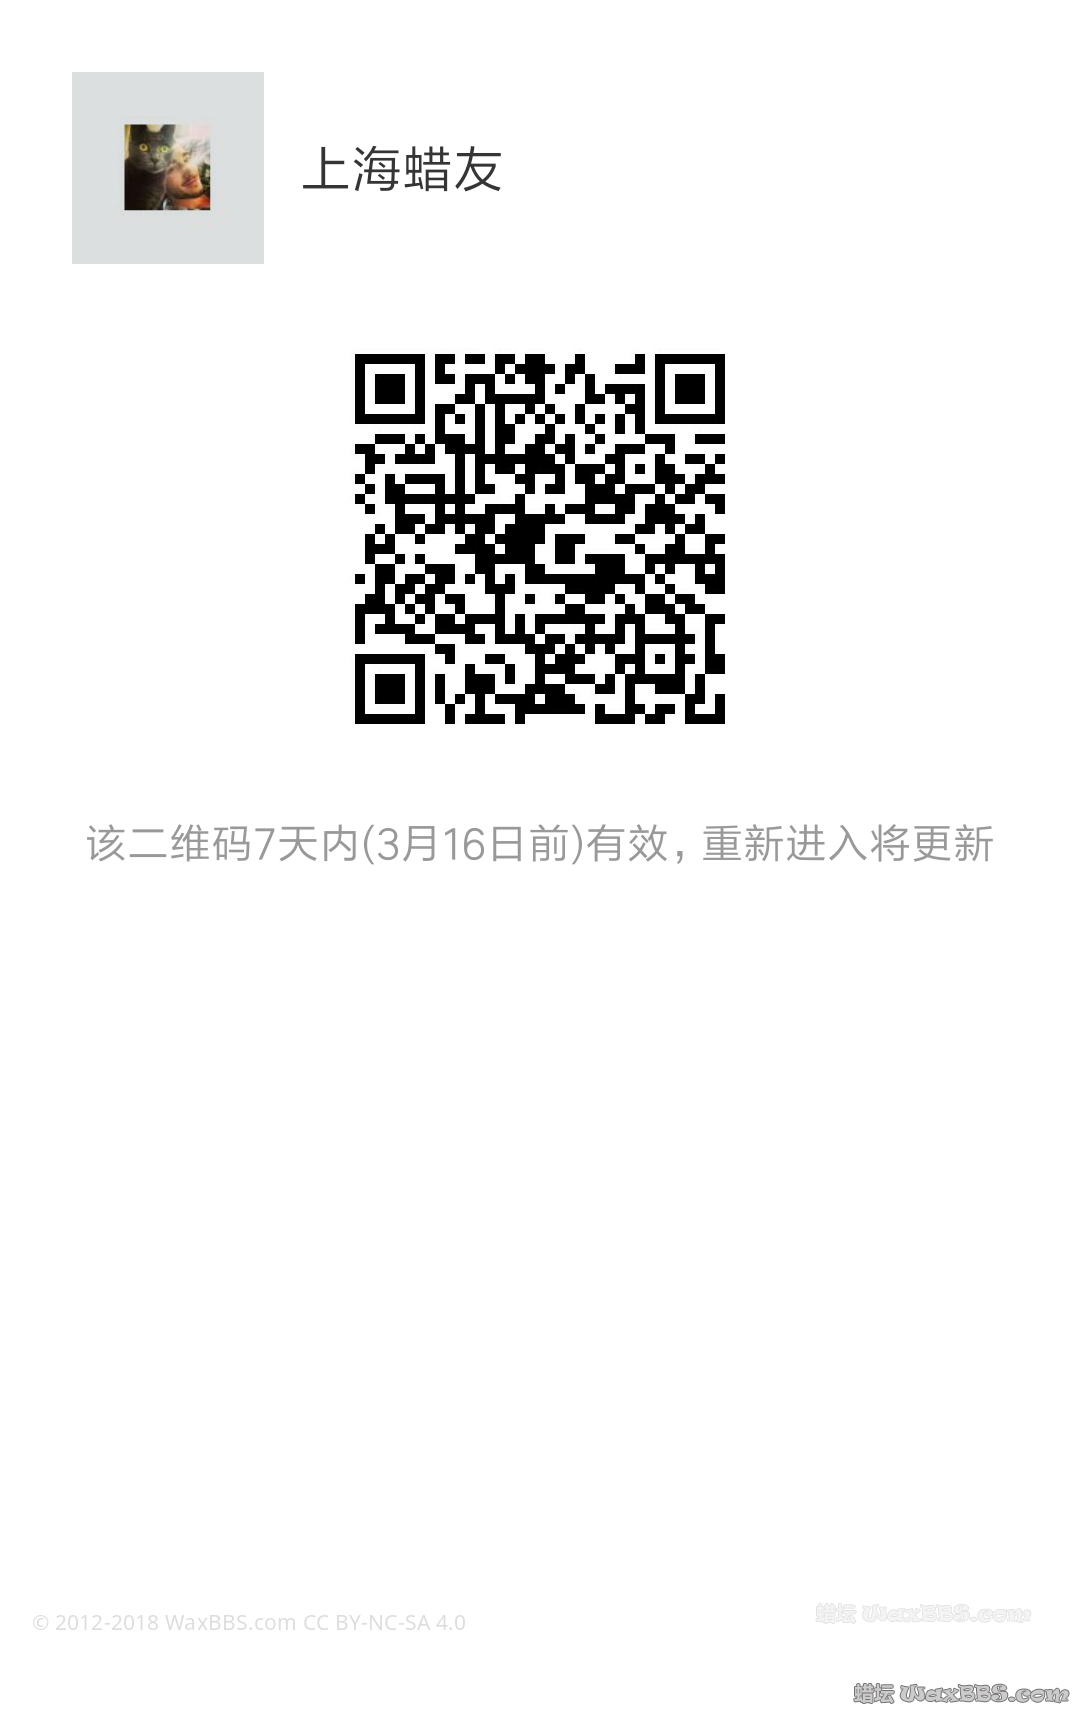 mmqrcode1489028765757.png